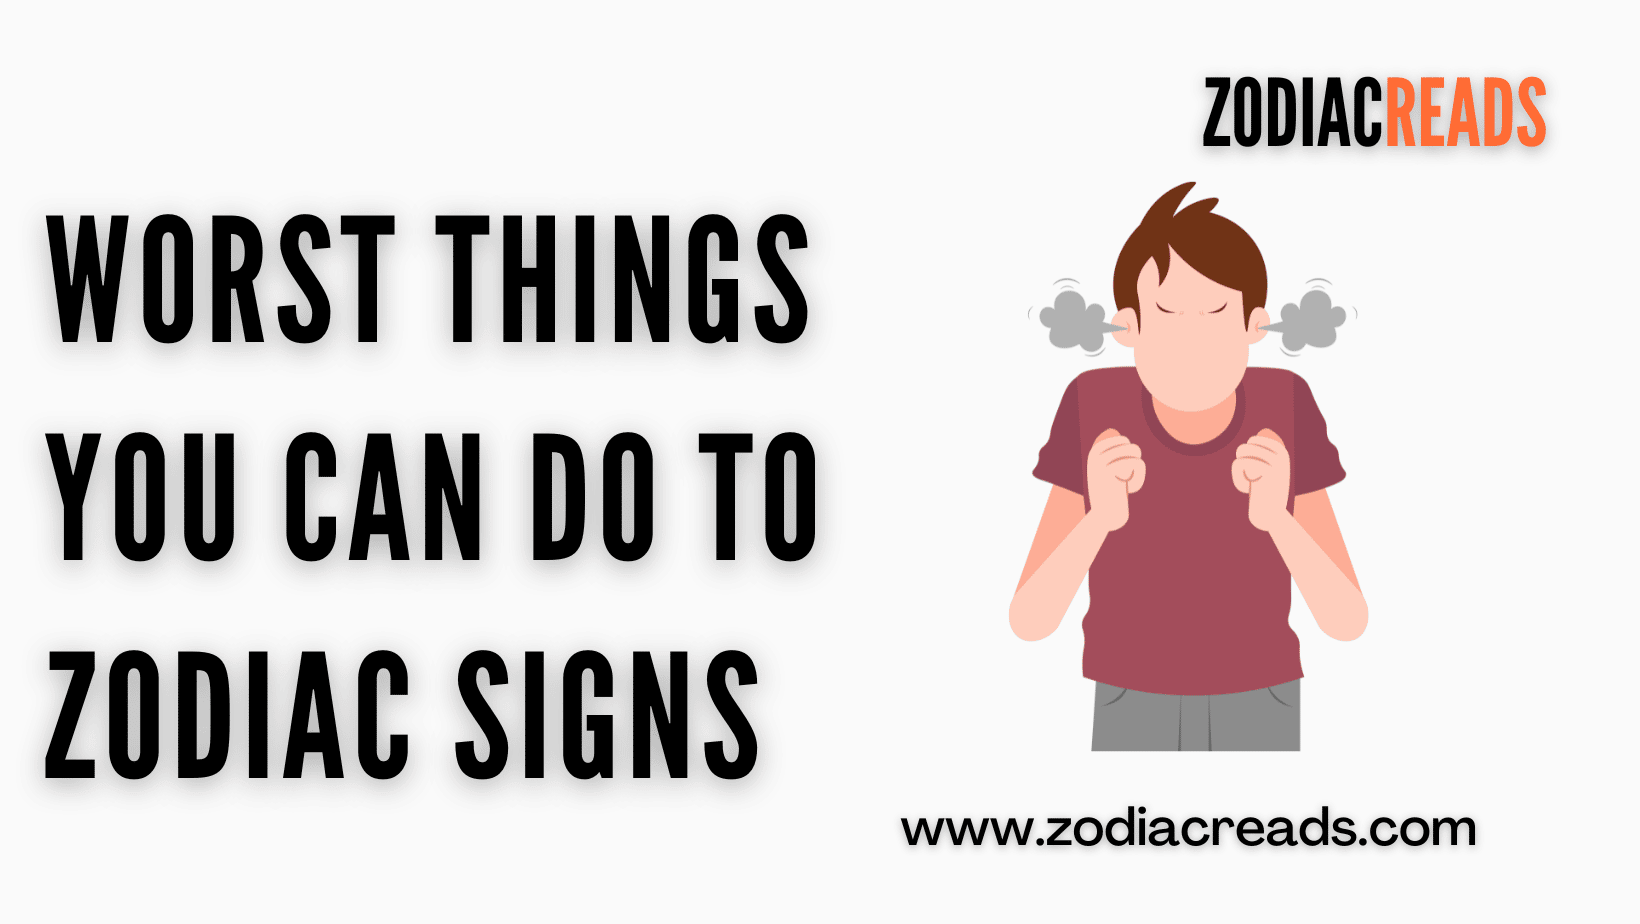 Worst things you can do to zodiac signs